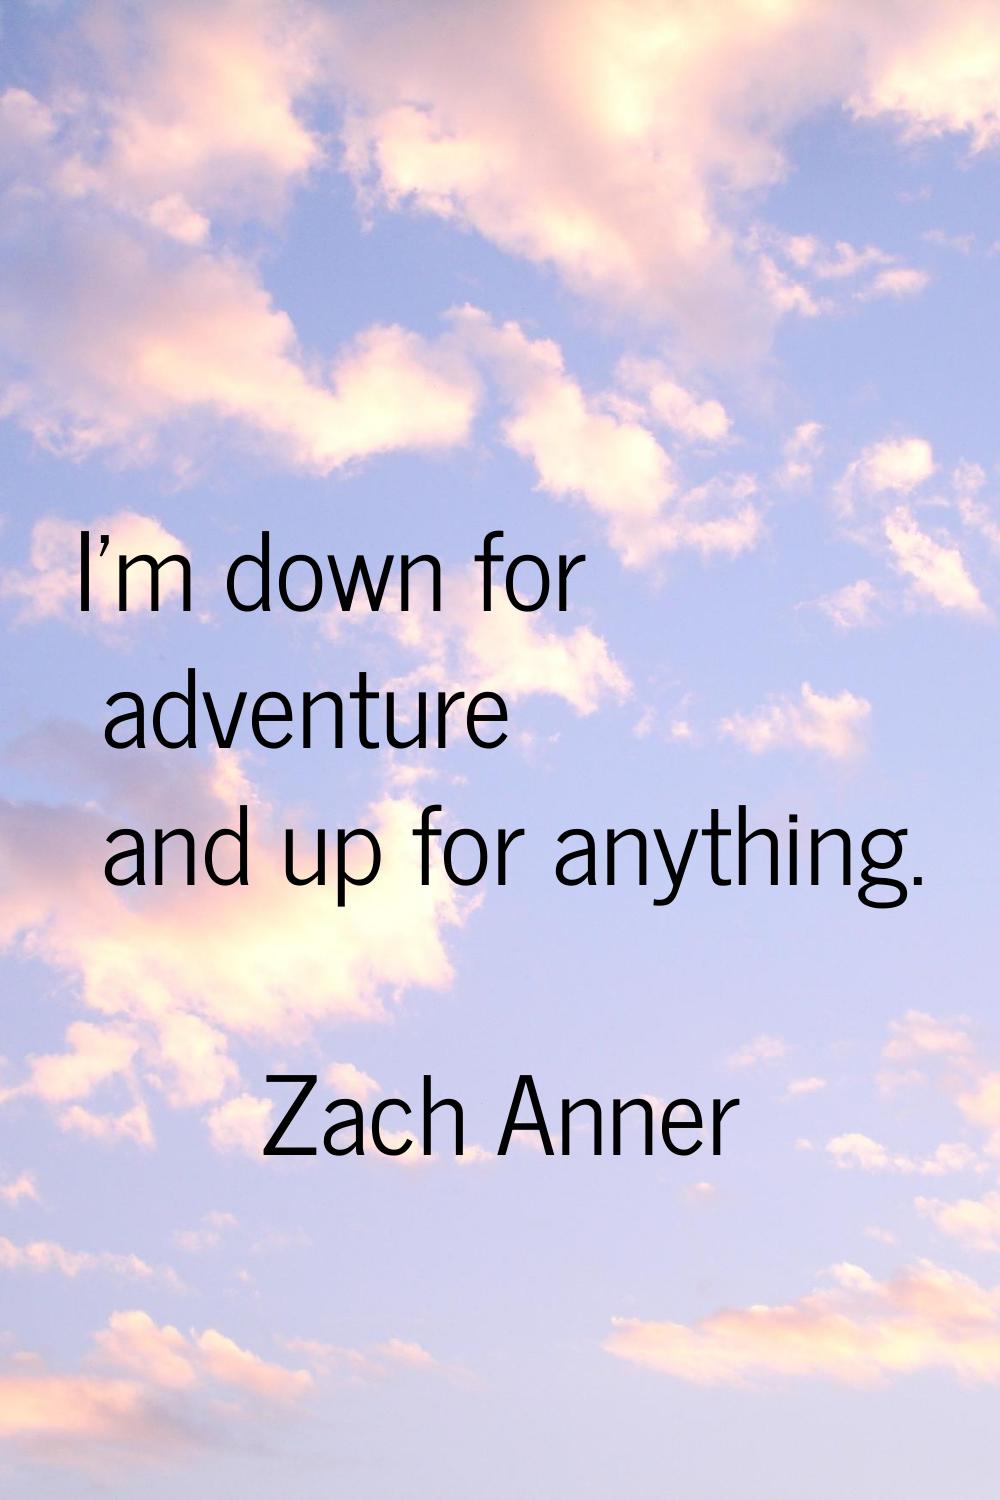 I'm down for adventure and up for anything.